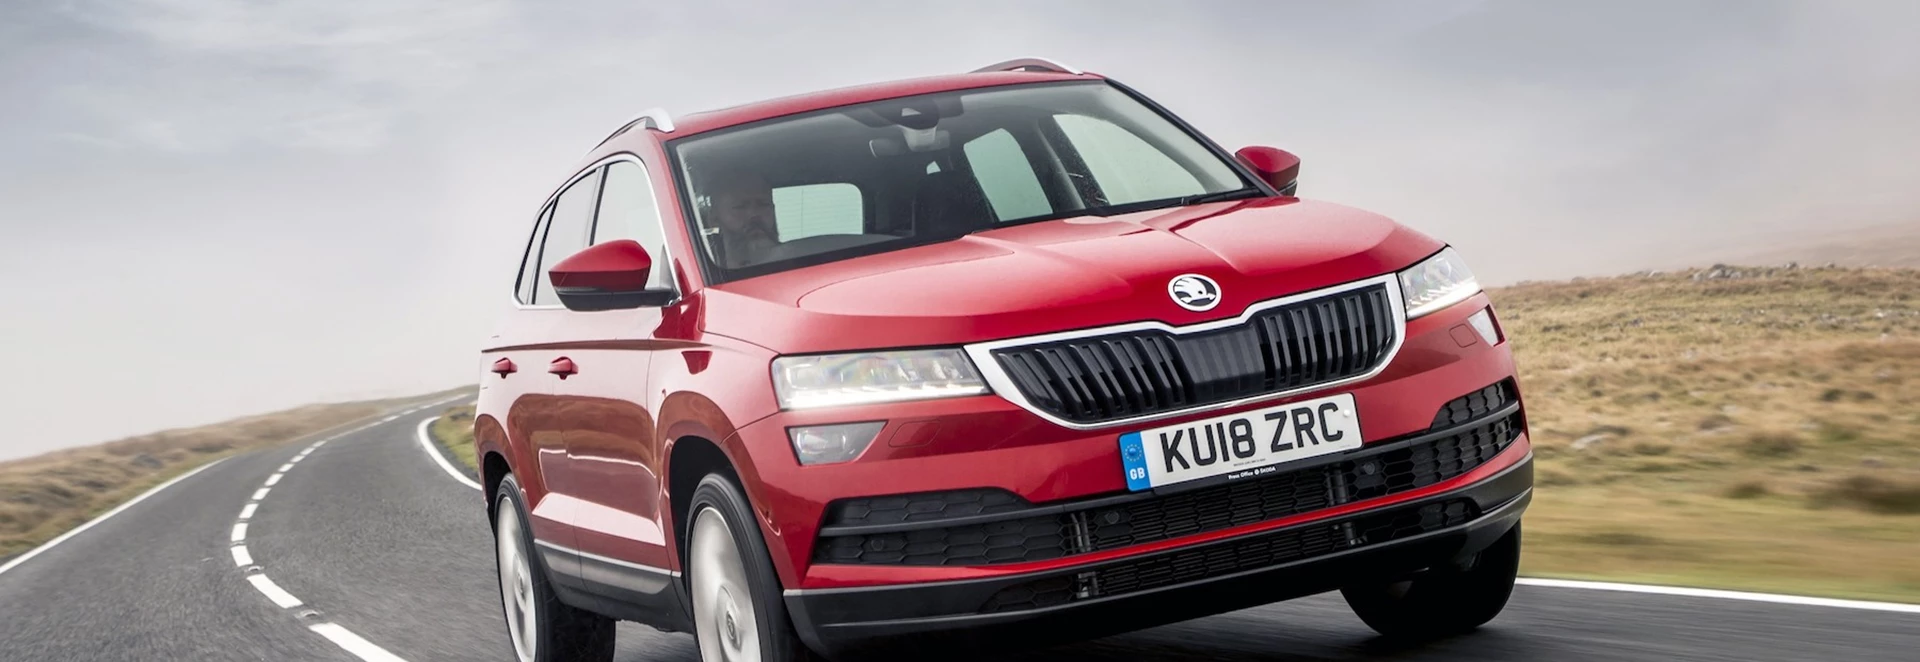 Skoda announces low cost servicing deal for Black Friday